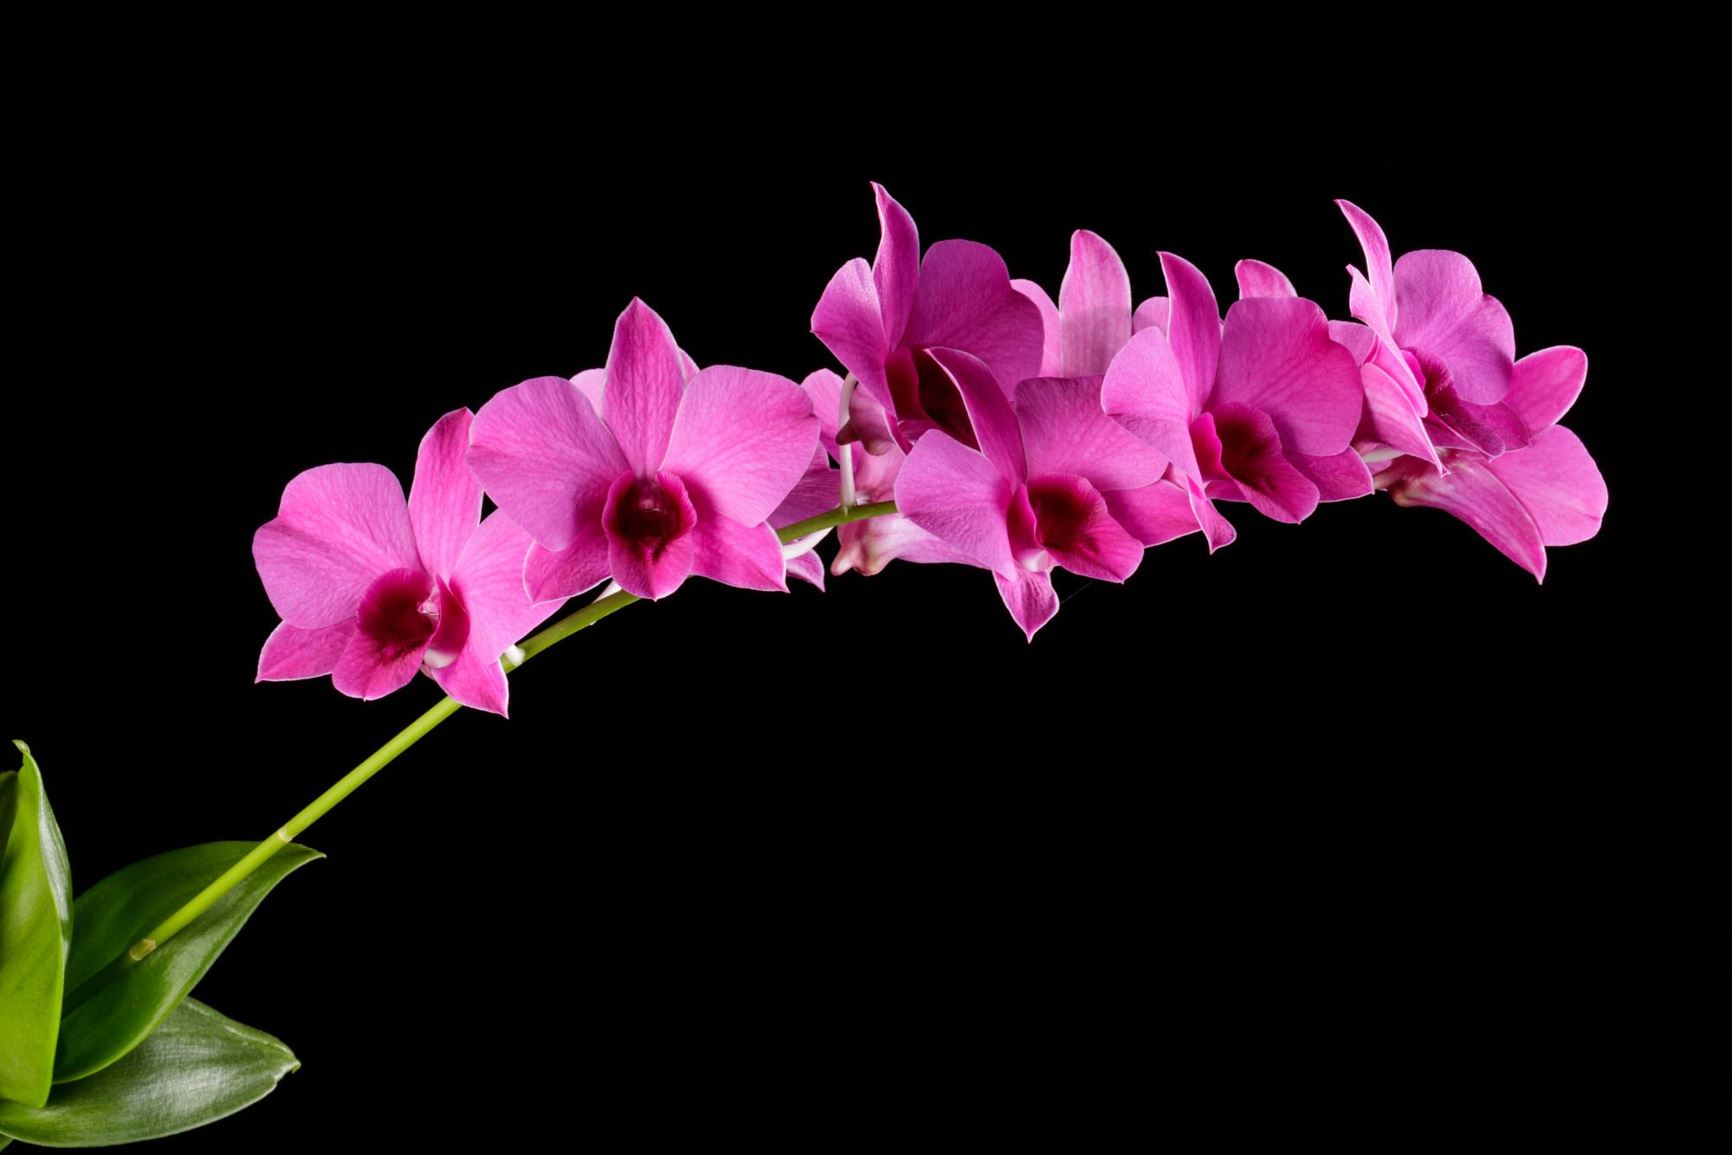 Dendrobium bigibbum - The Cooktown Orchid, The Mauve Butterfly Orchid, The Two-Humped Dendrobium